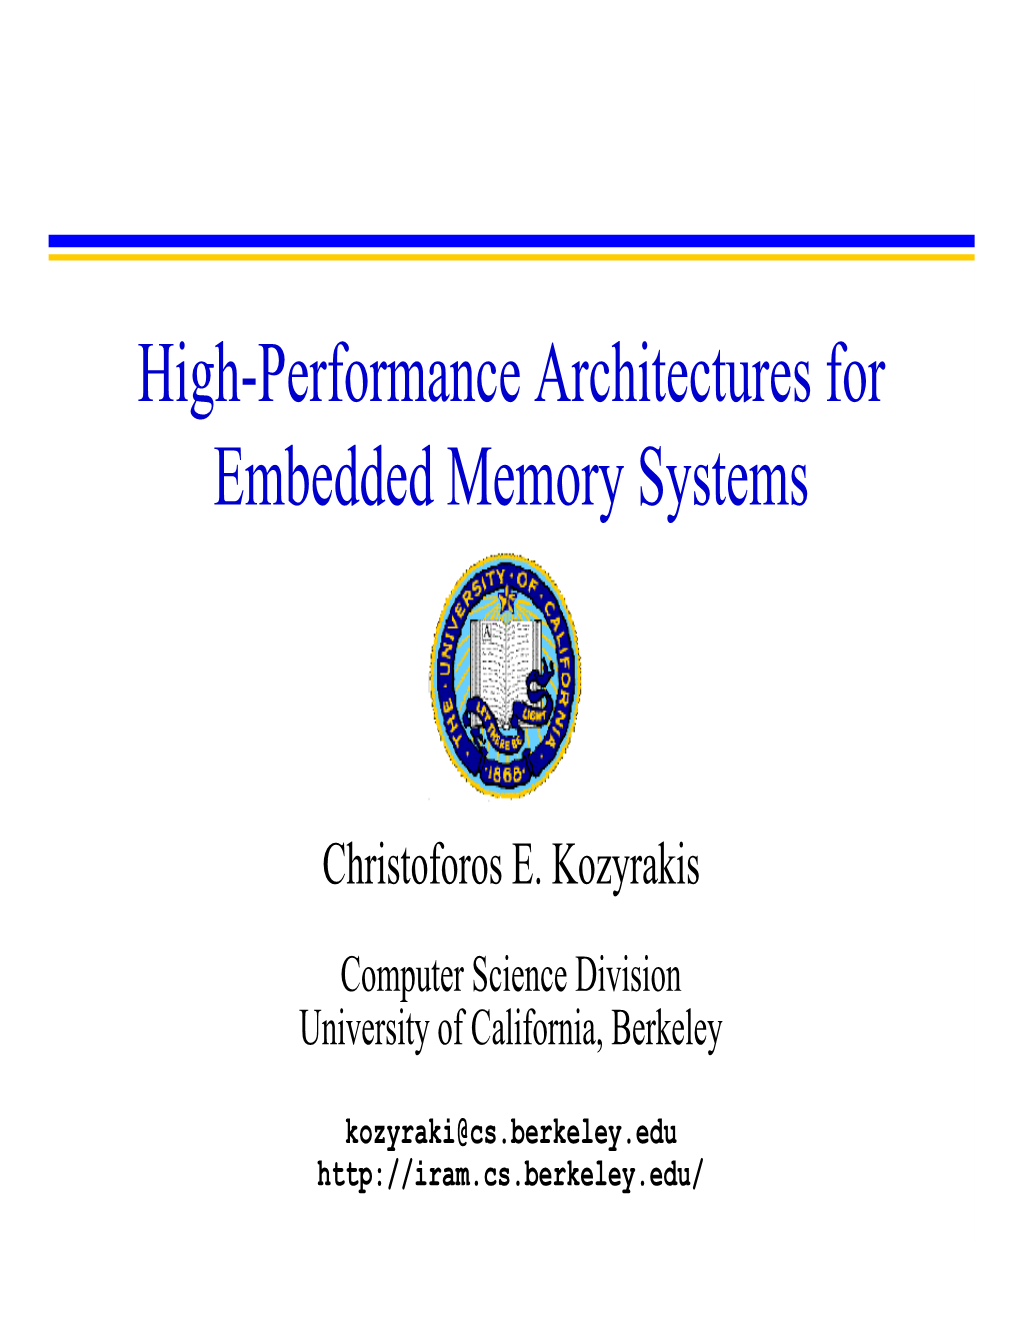 High-Performance Architectures for Embedded Memory Systems